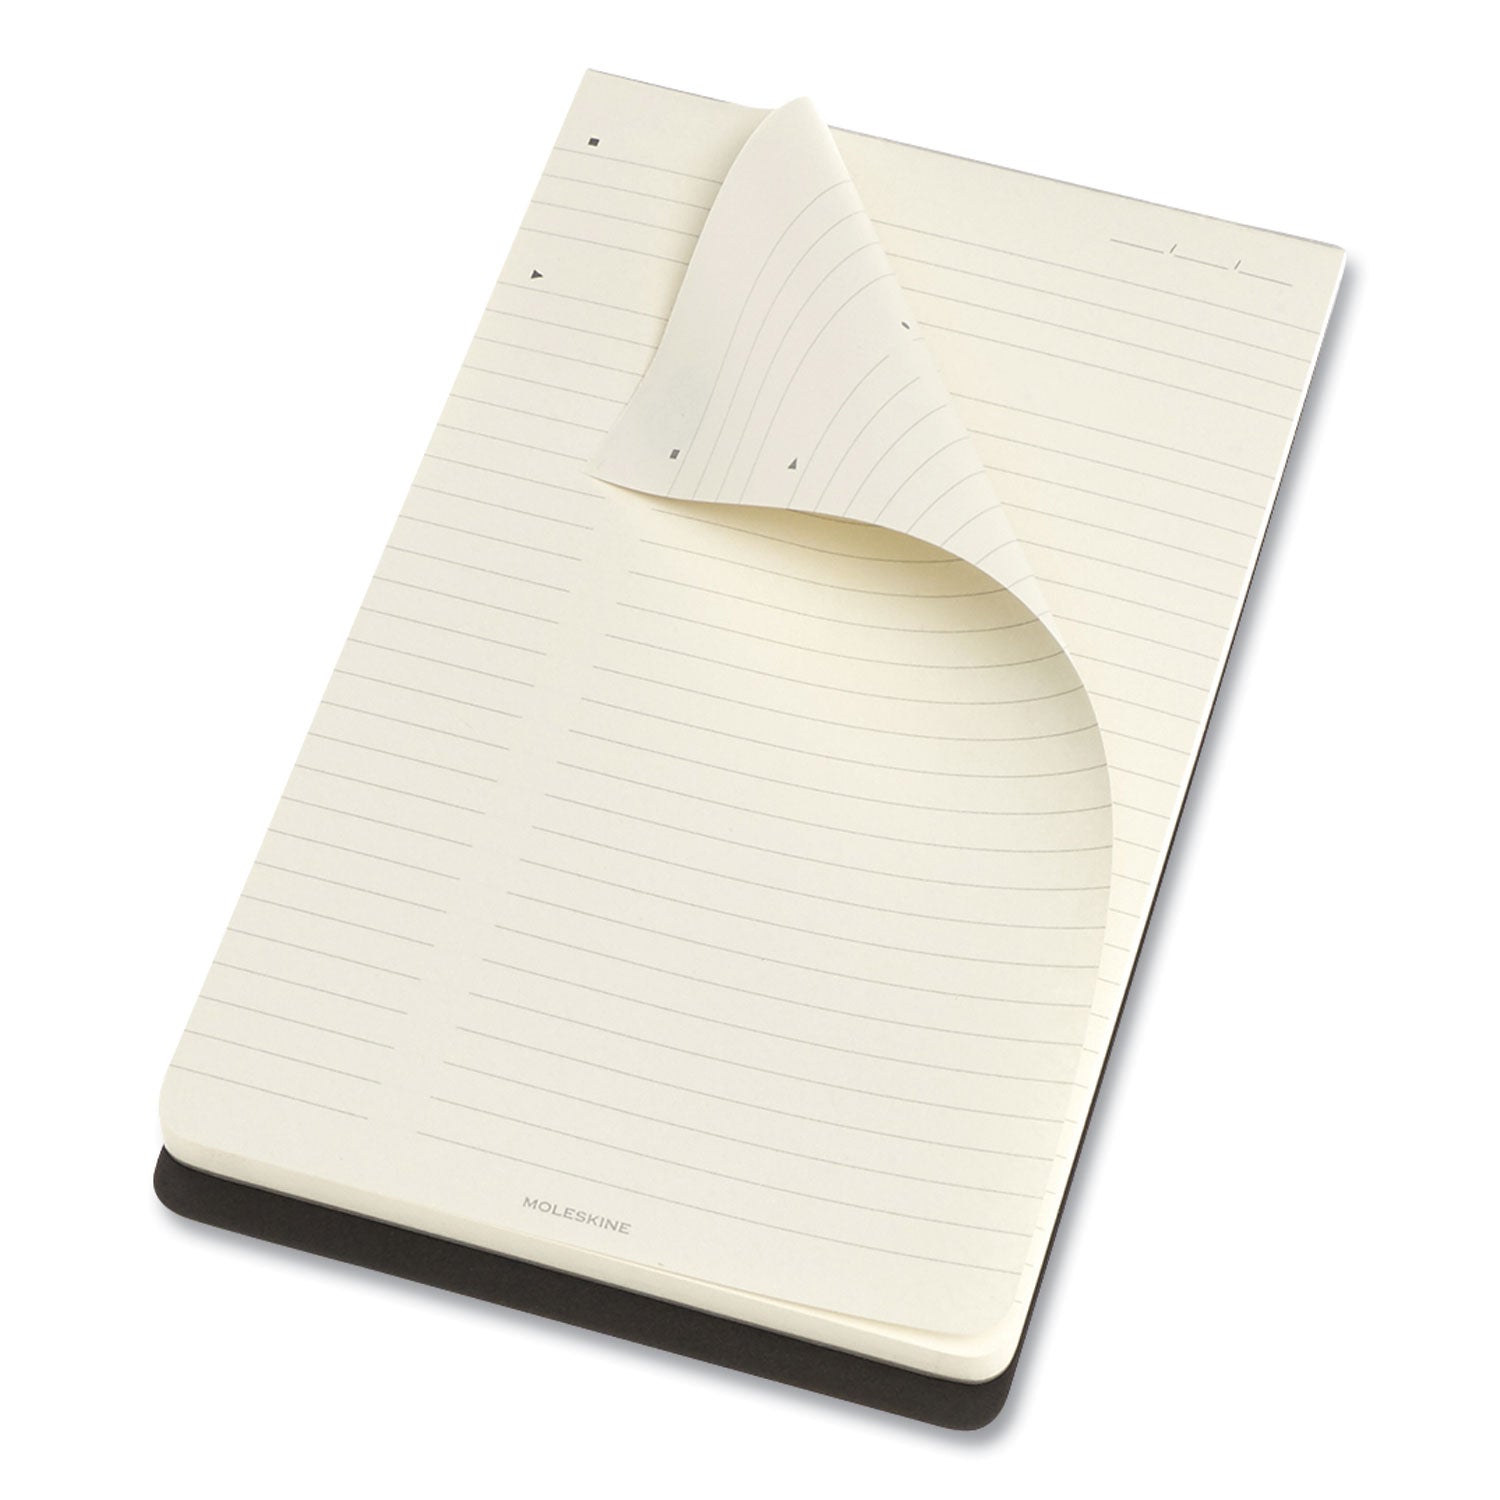 pro-pad-meeting-minutes-notes-format-black-cover-96-ivory-5-x-825-sheets_hbg620916 - 4